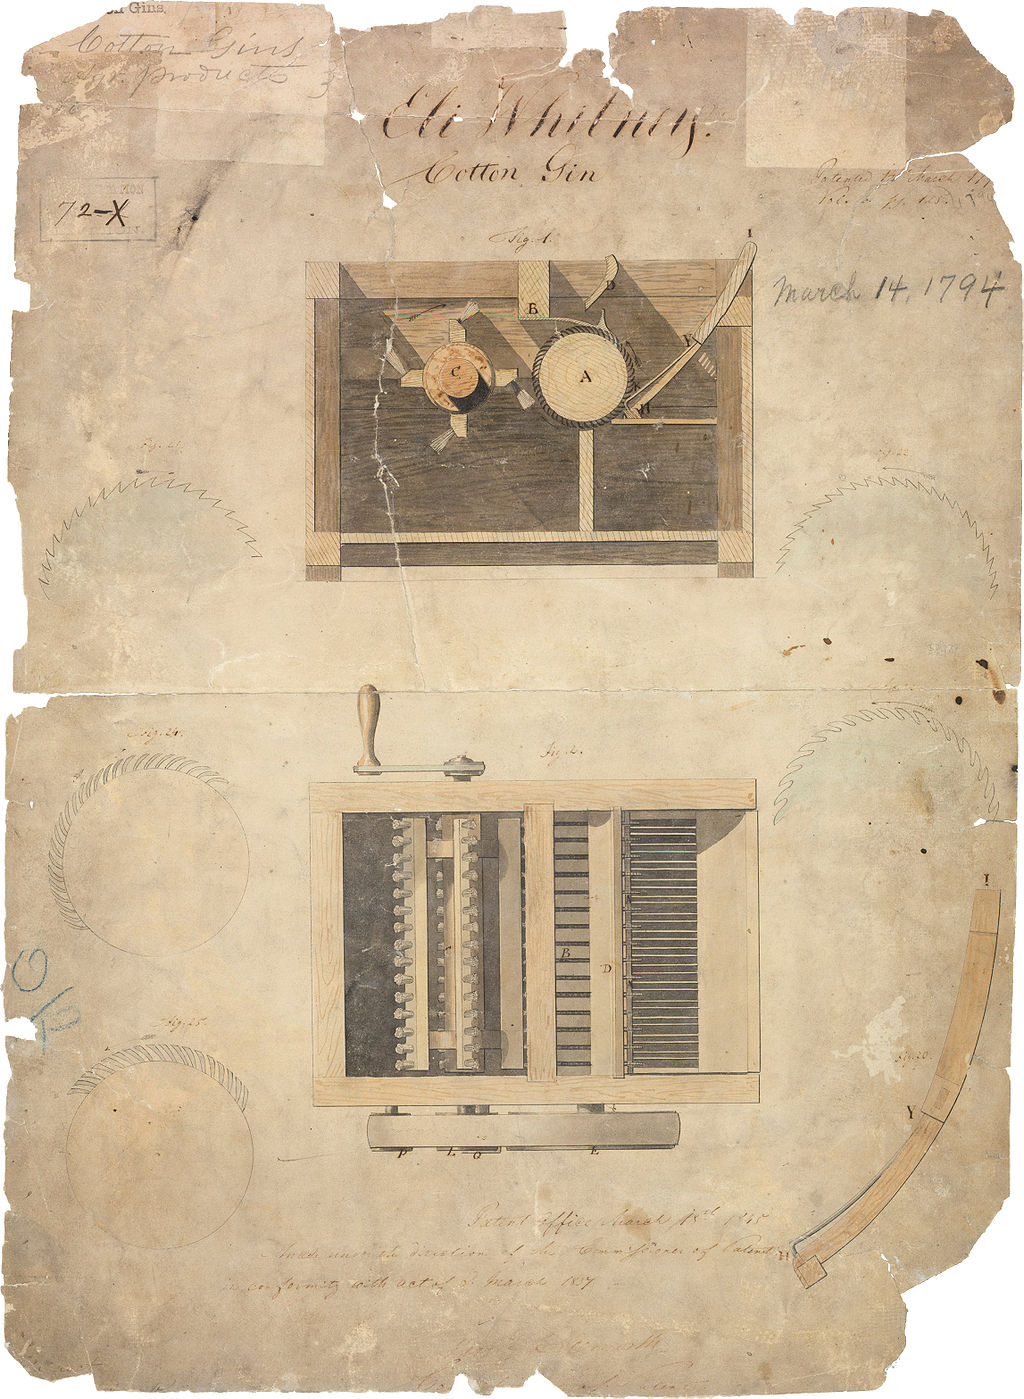 Eli Whitney's original cotton gin patent, dated March 14, 1794
